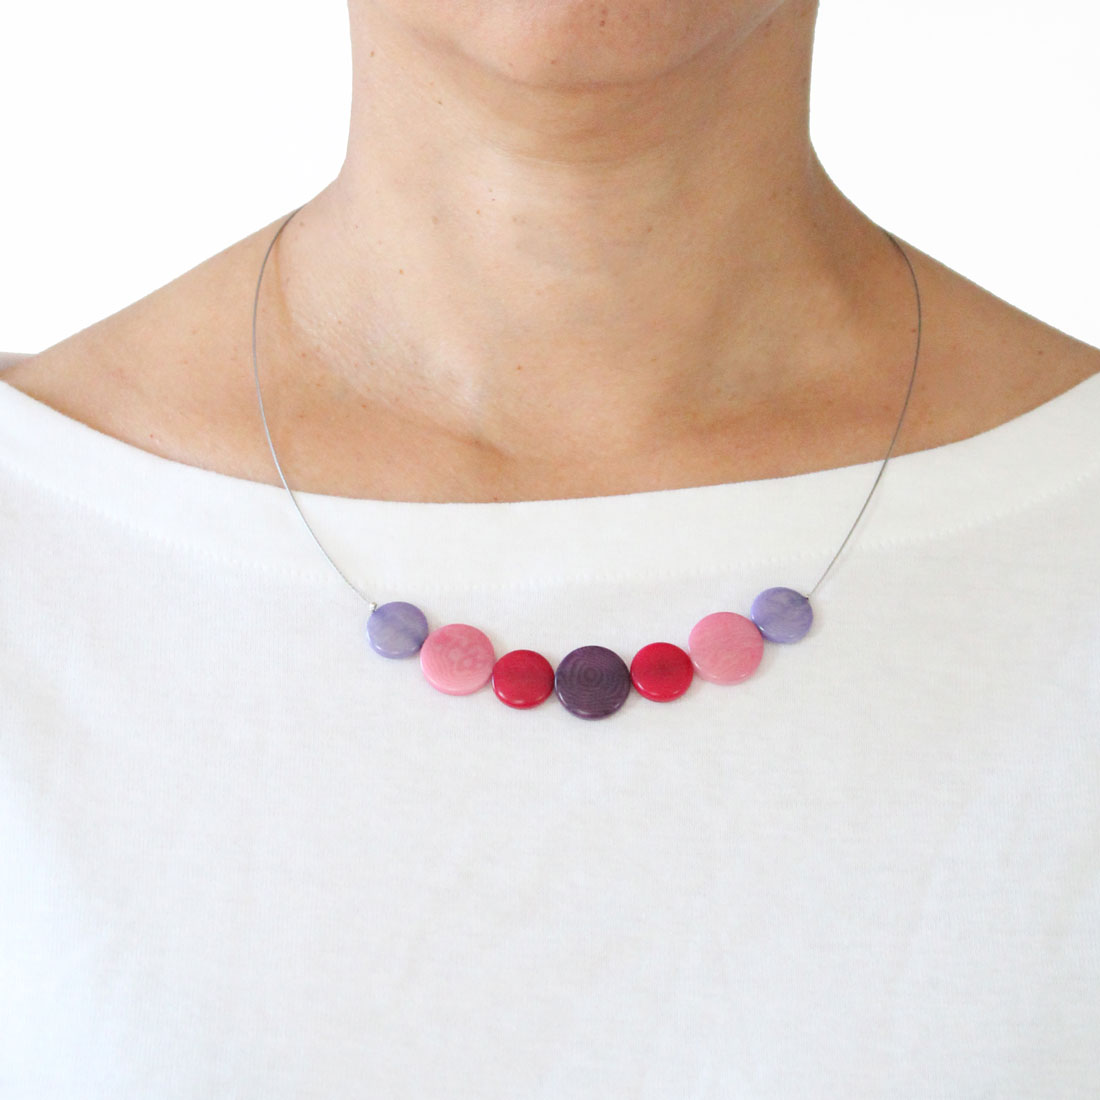 Chic Tagua Necklace in Natural Ivory